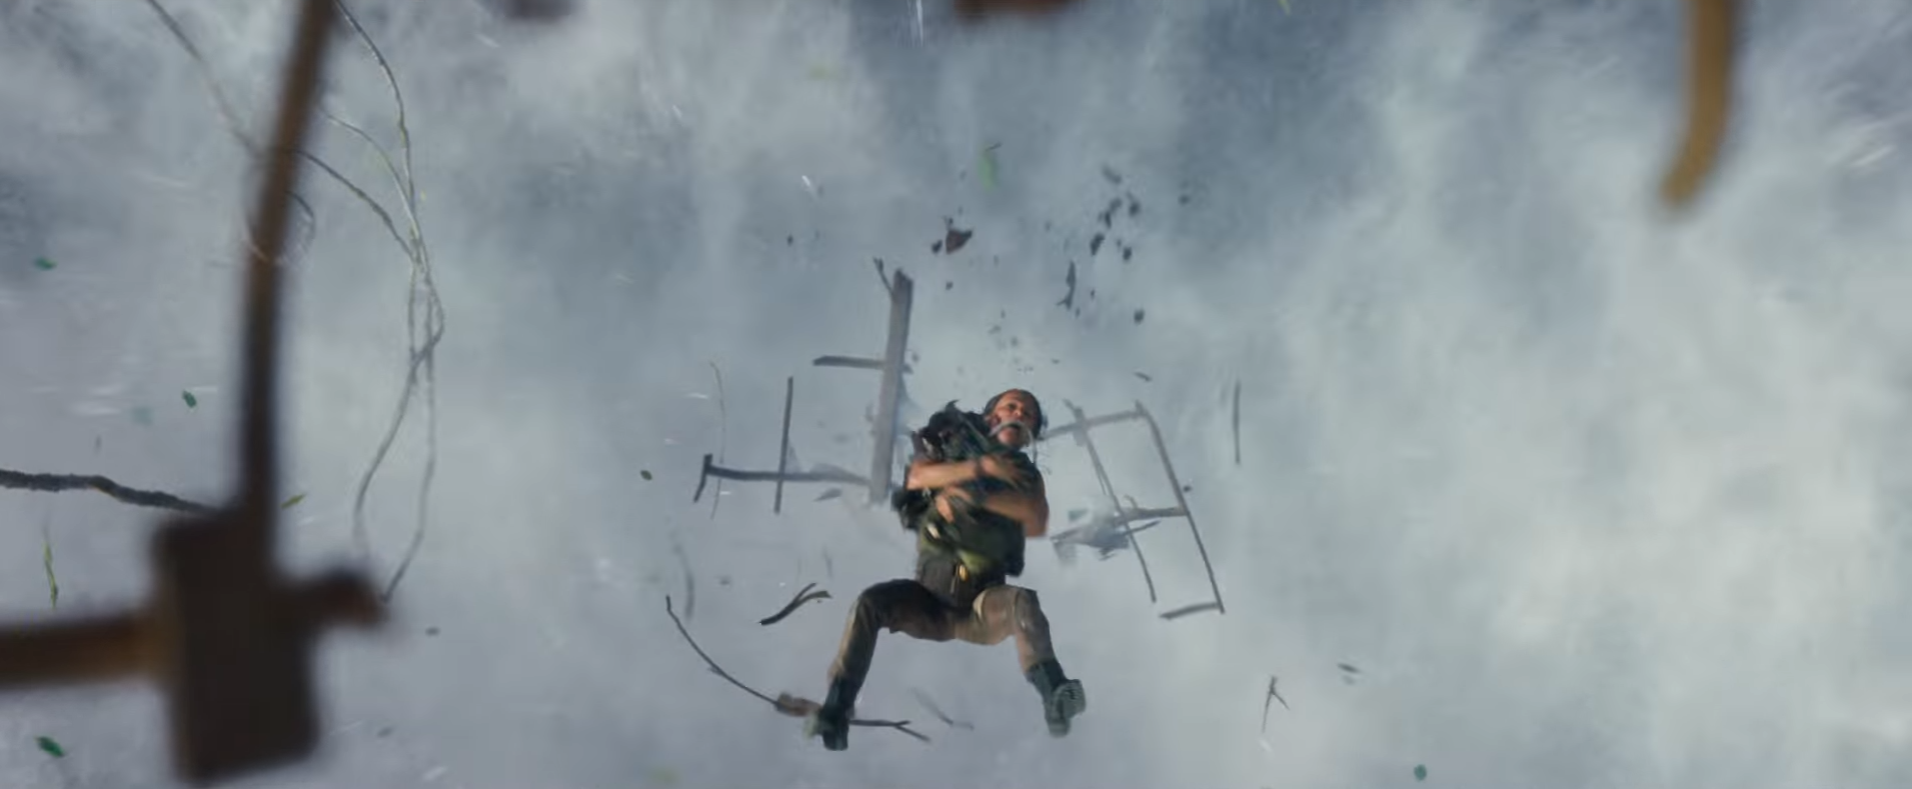 First Trailer For Tomb Raider Starring Alicia Vikander